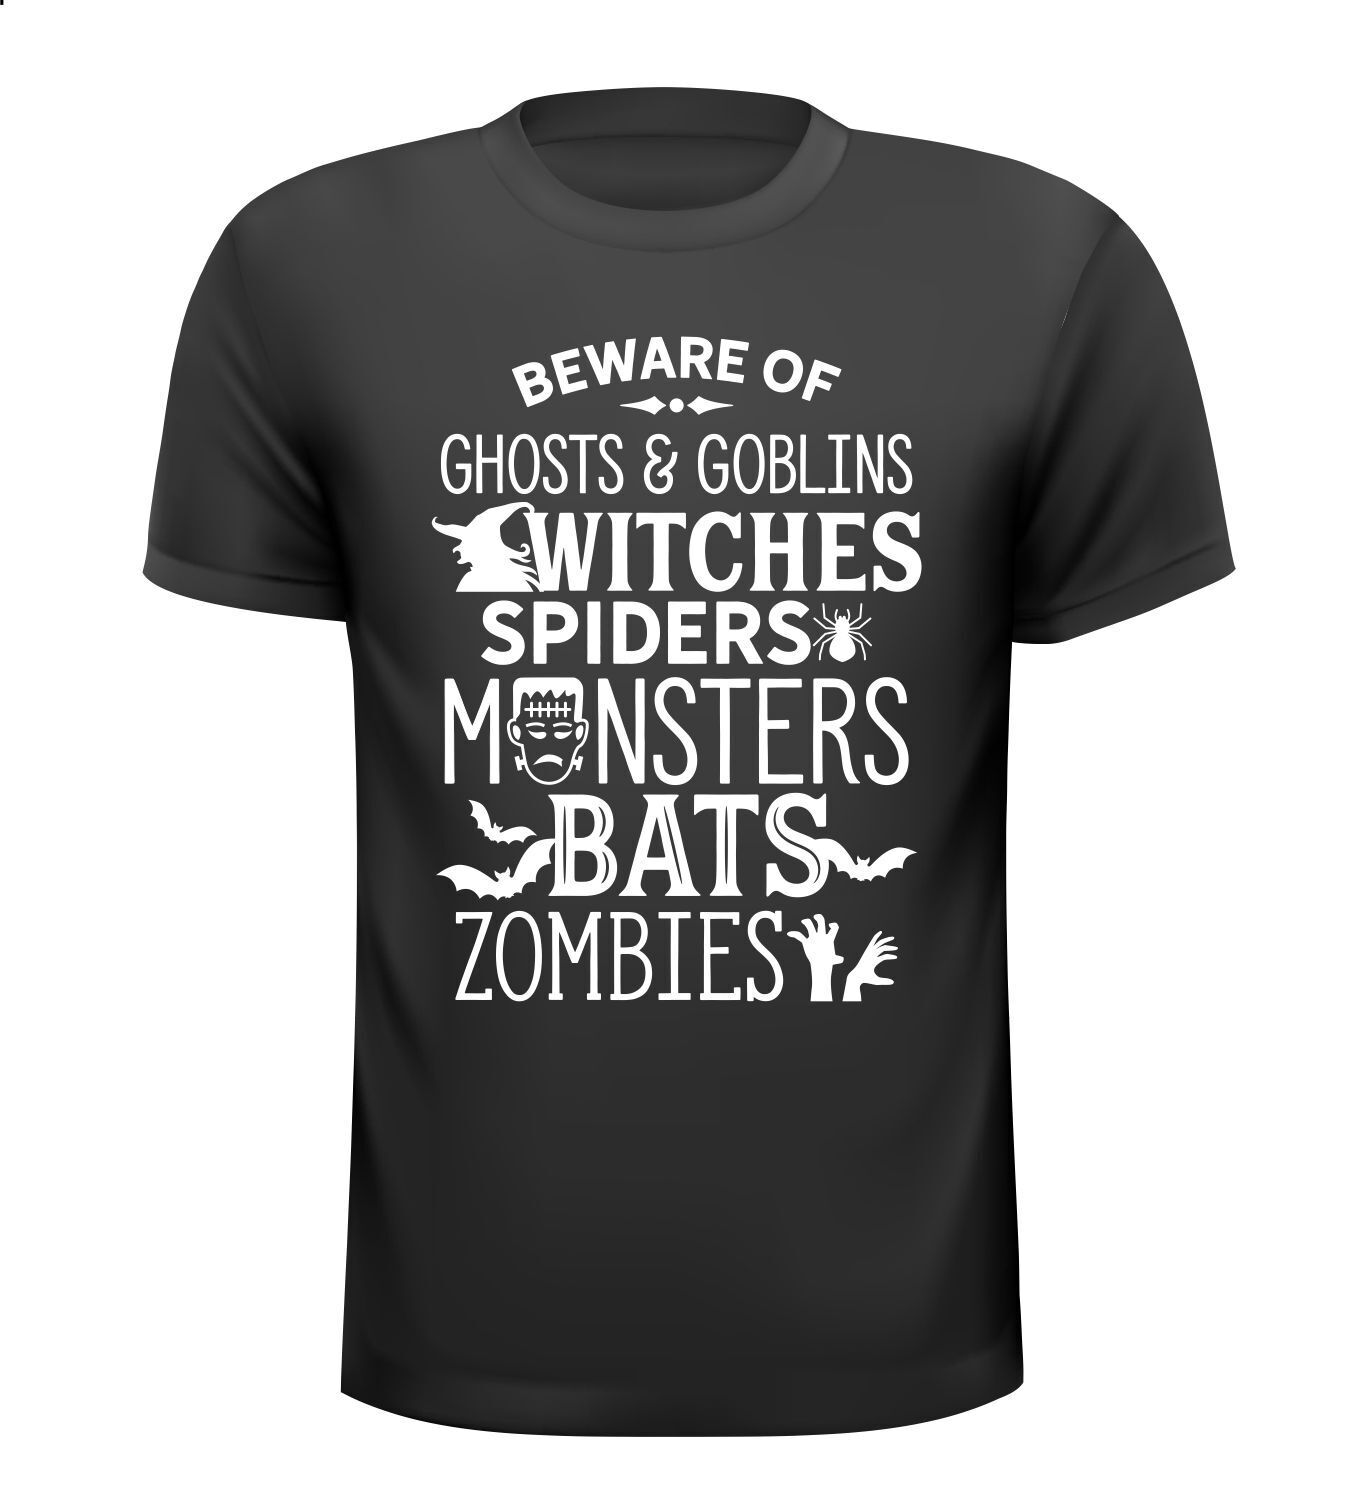 T-shirt super vet Halloween shirtje beware of ghosts gobling witches spiders monsters bats zombies